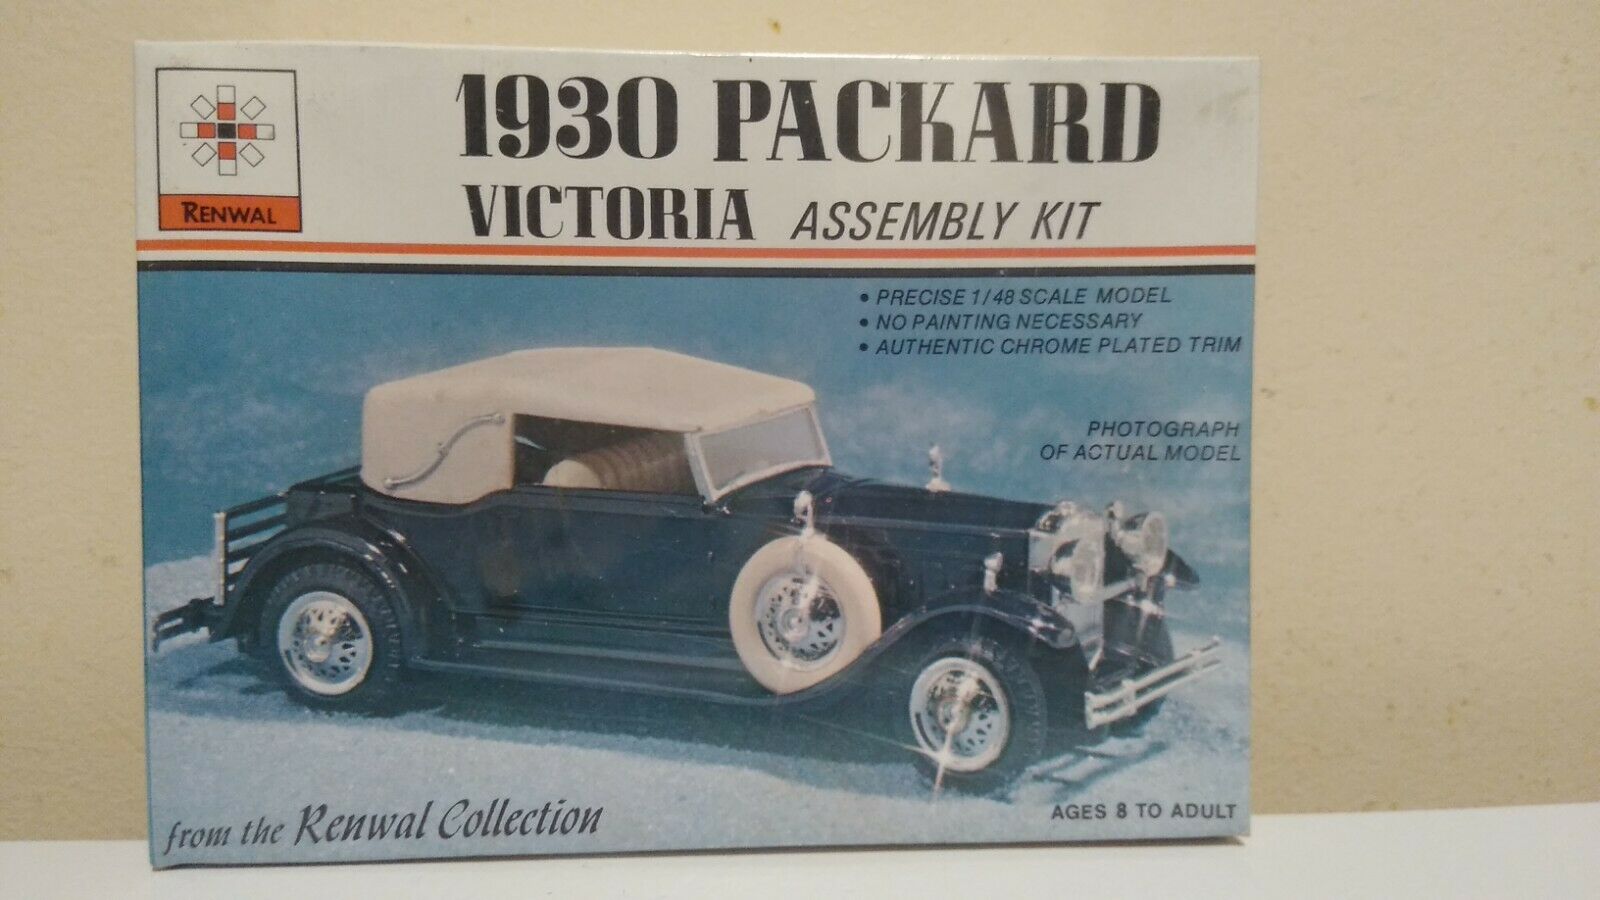 1930 Packard Victoria 1/48 Scale By Renwal Unassembled Plastic Kit Sealed Box